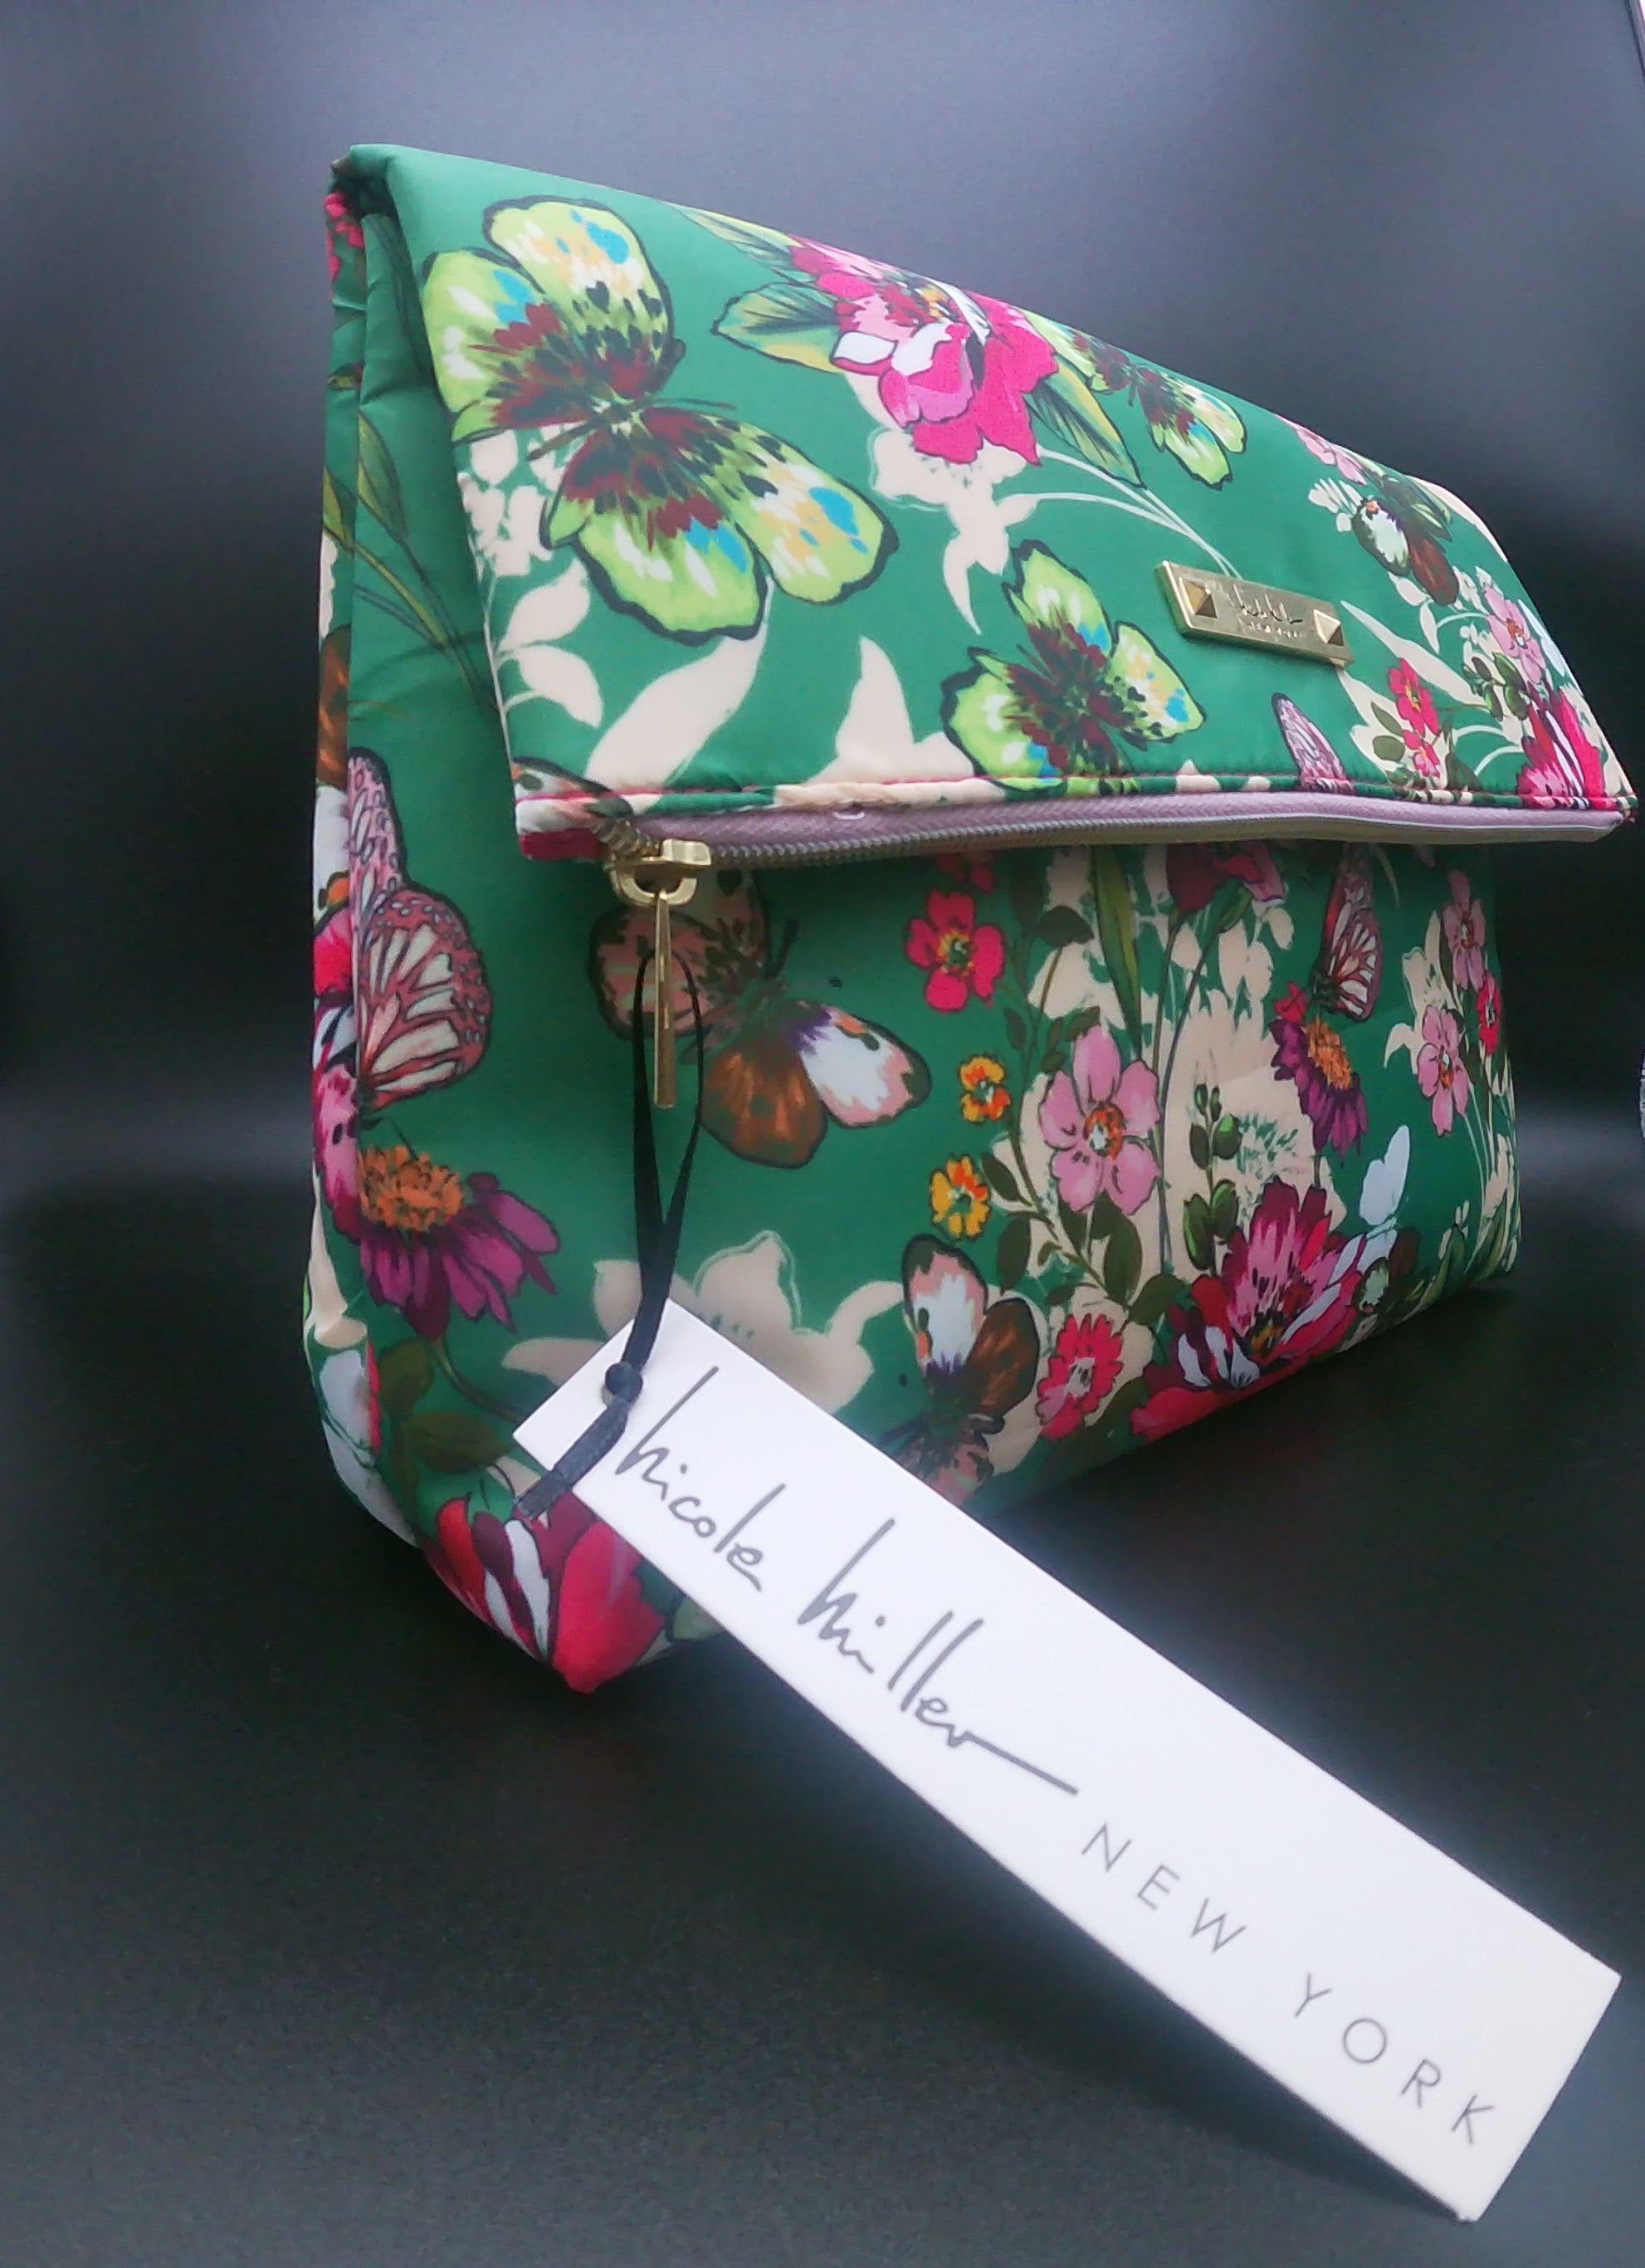 Green Multi-Colored Floral Zippered Nicole Miller Cosmetic Bag